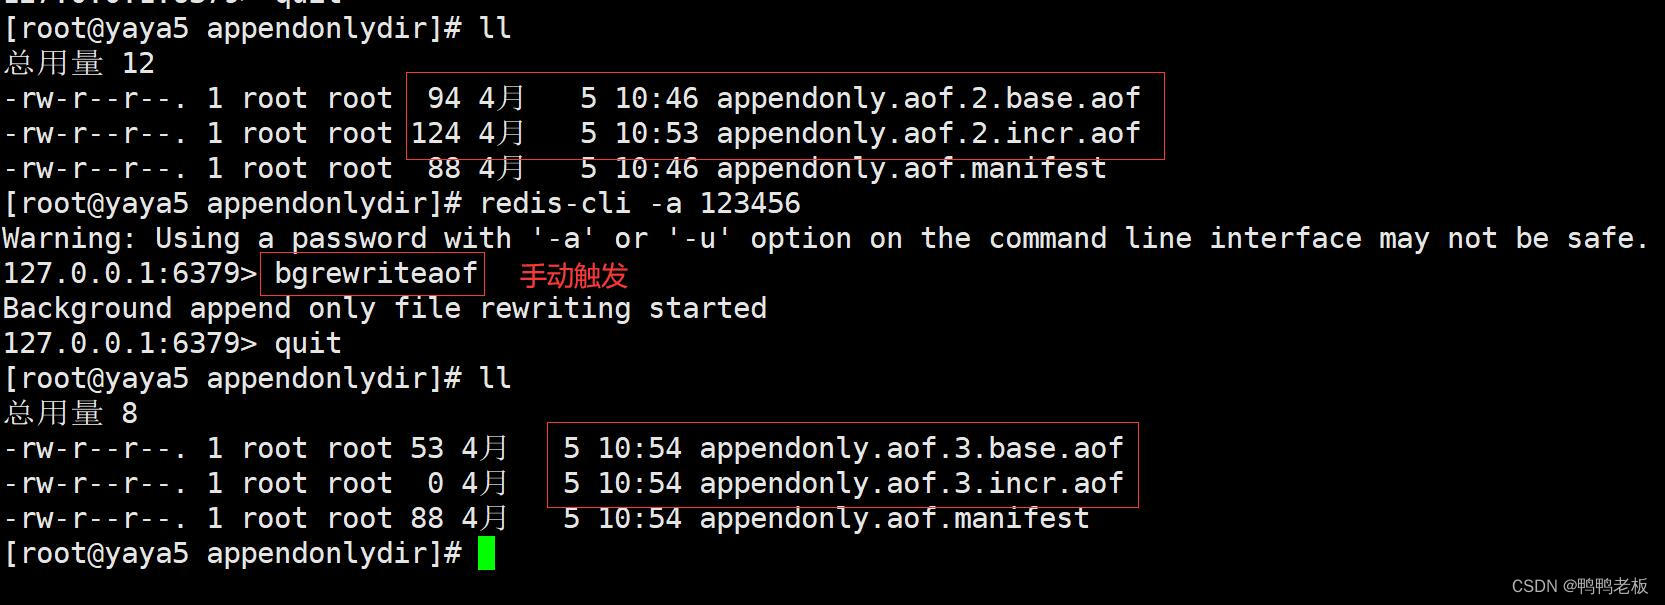 redis --- AOF(Append Only File)